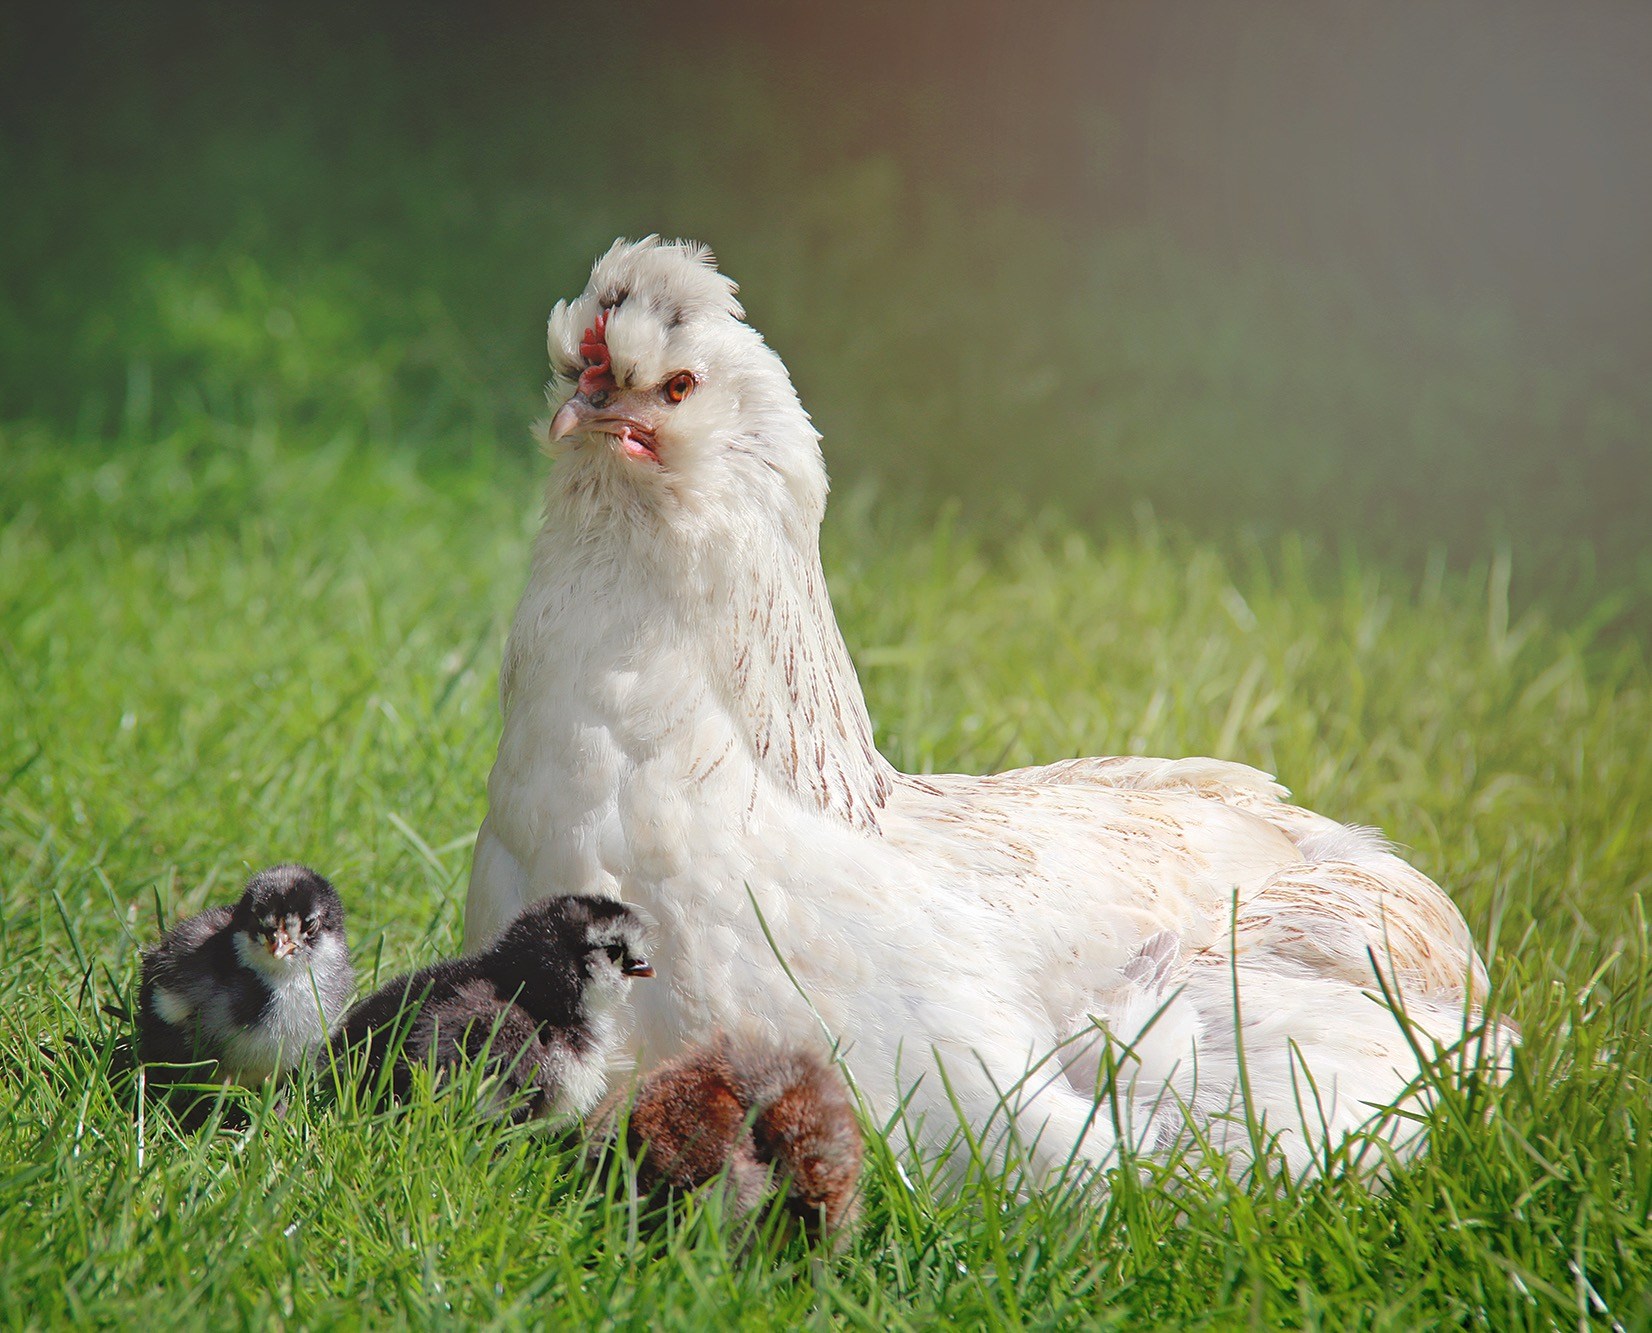 Hatching Chicks with Mother Hens